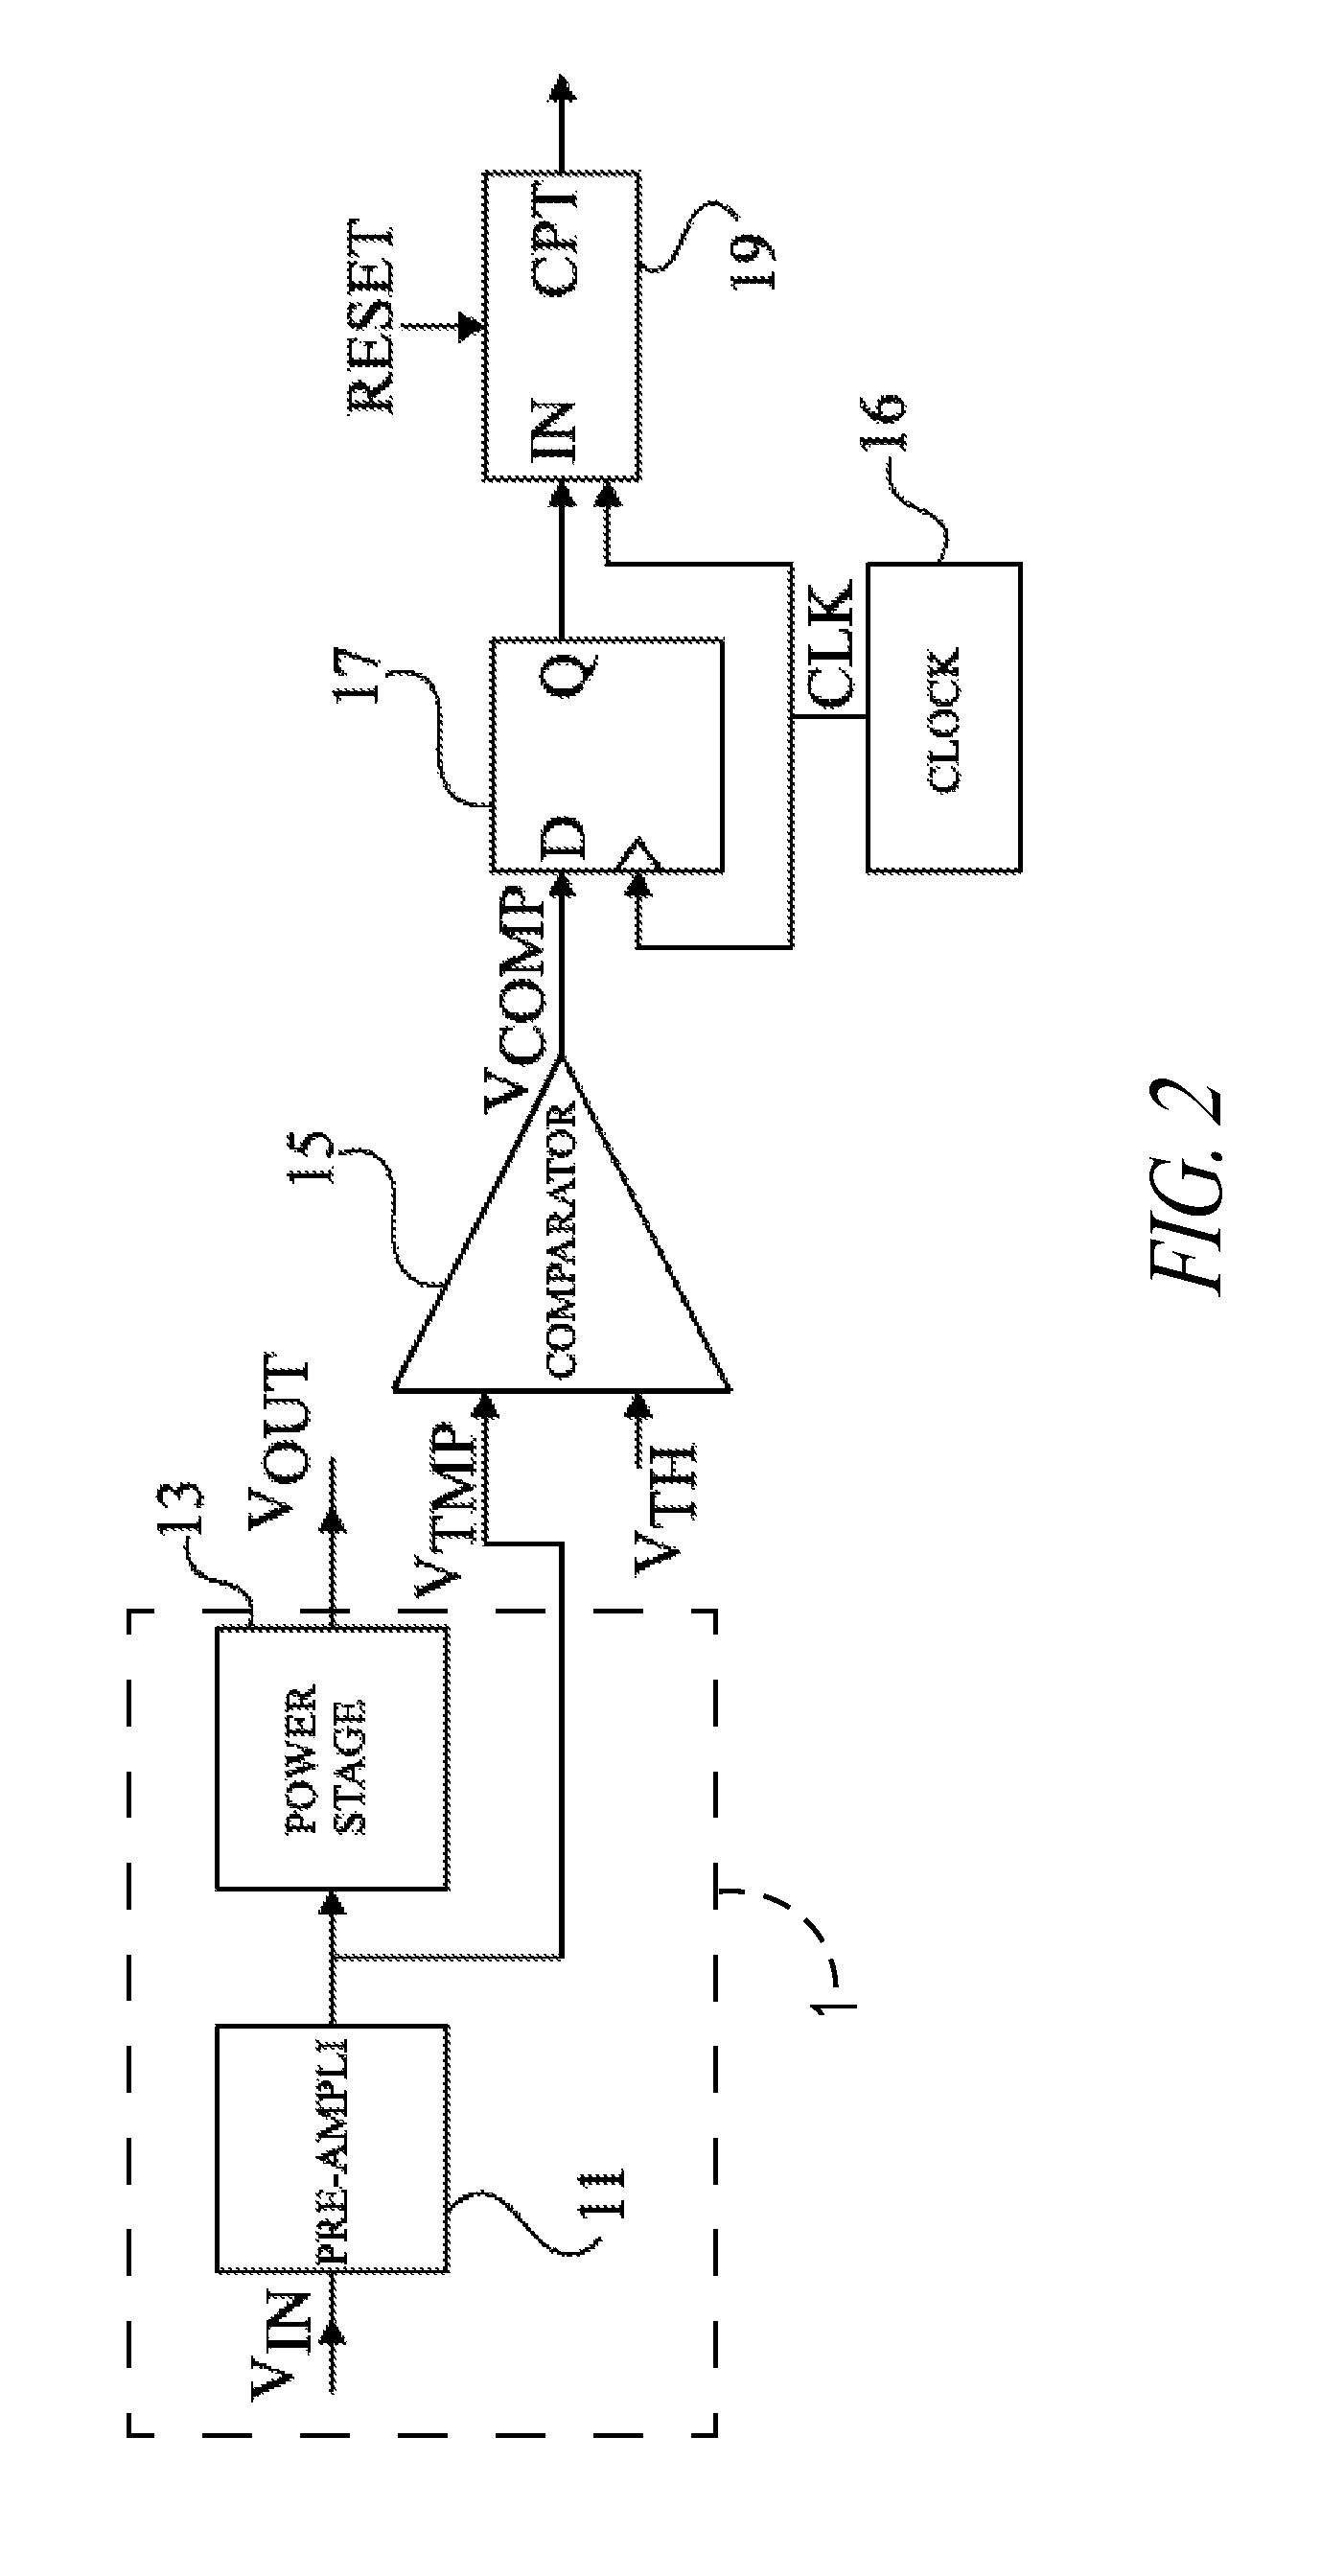 Method for measuring the saturation rate of an audio amplifier